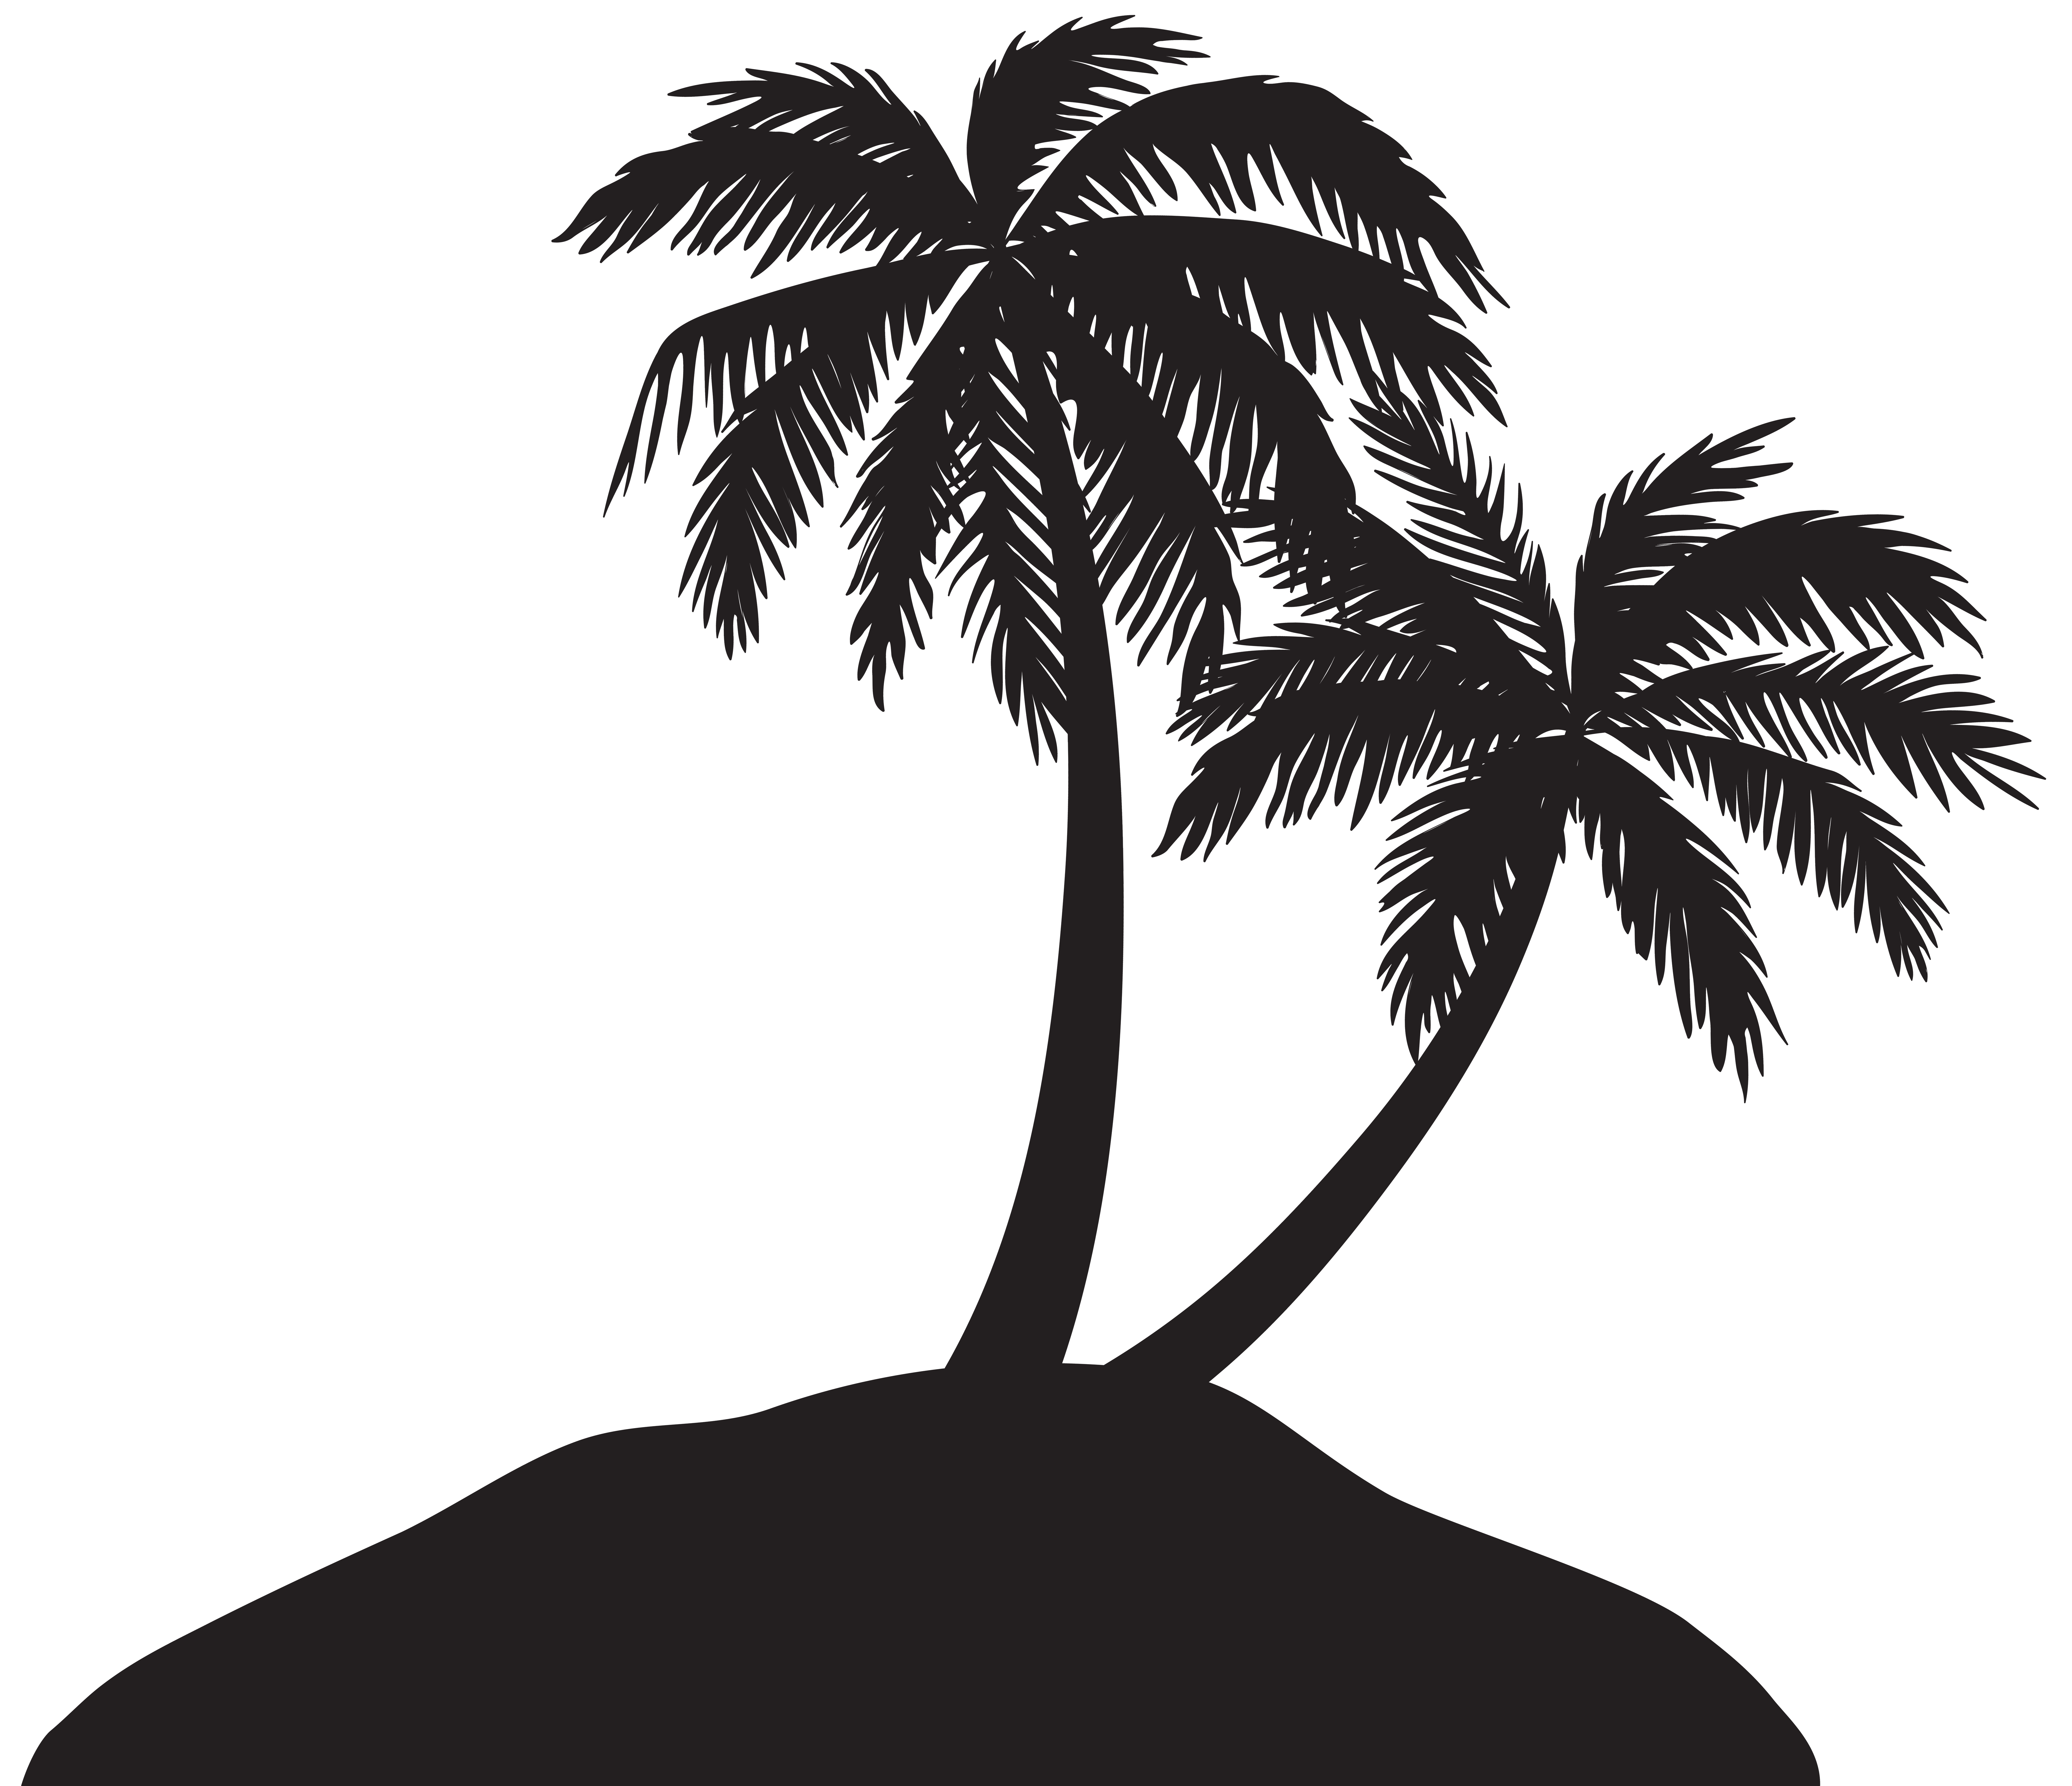 Island with trees silhouette. White clipart palm tree